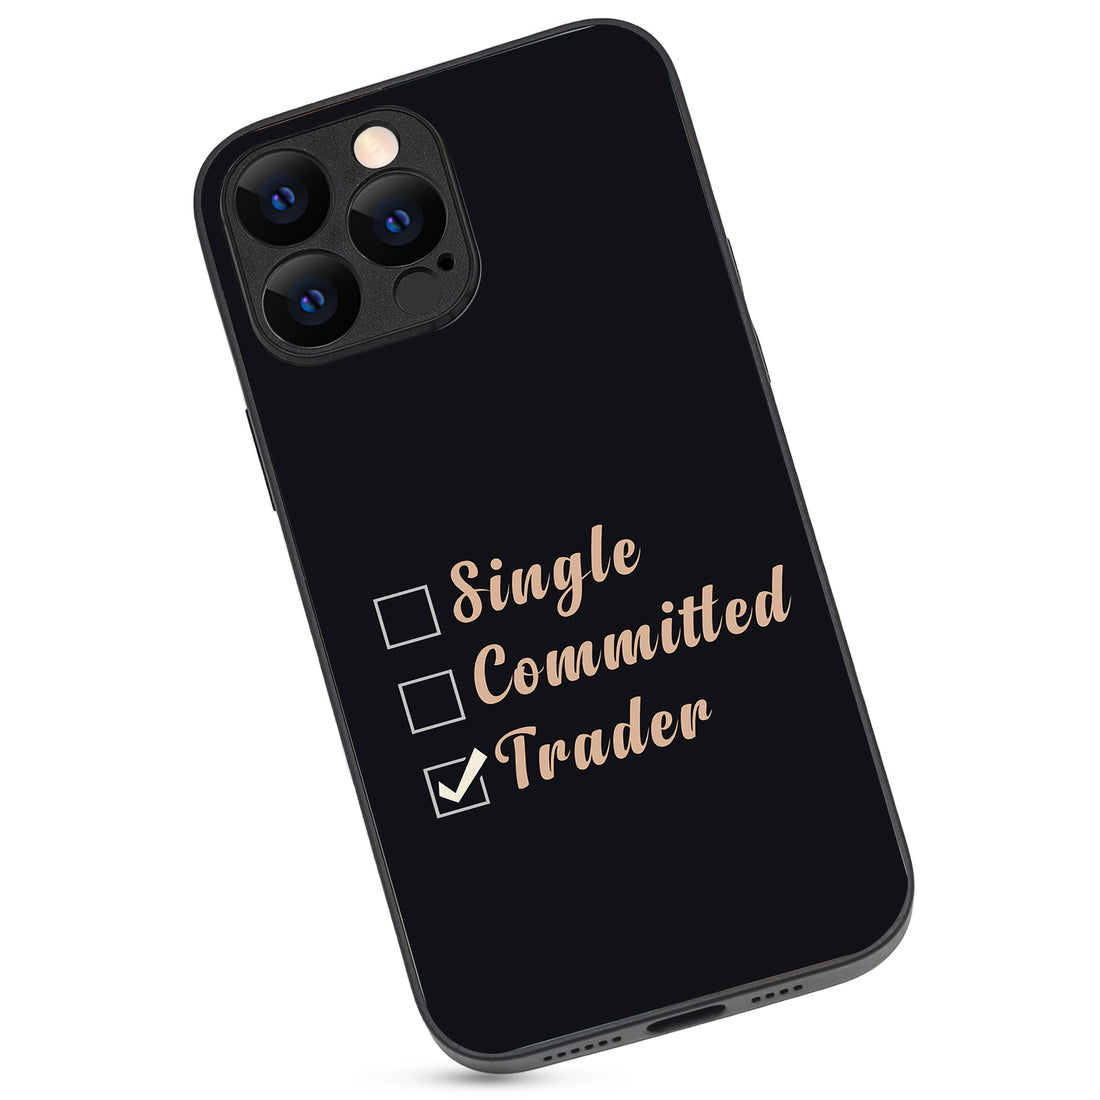 Single, Commited, Trader Trading iPhone 13 Pro Max Case